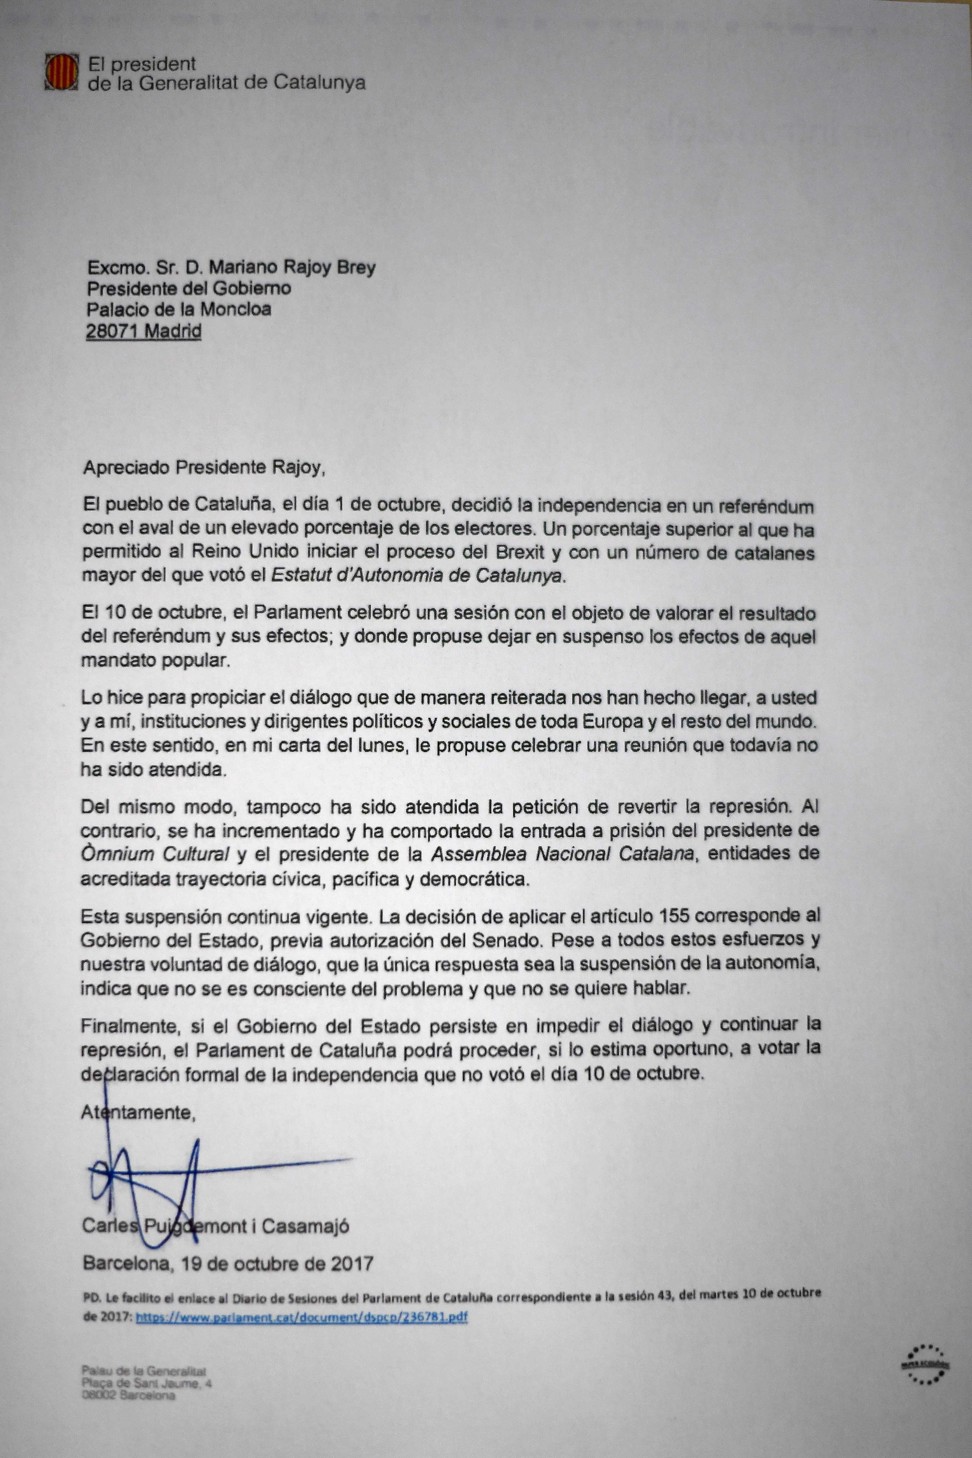 A copy of the letter sent by Catalan regional government president Carles Puigdemont to Spanish Prime Minister Mariano Rajoy on October 19, 2017. Photo: AFP